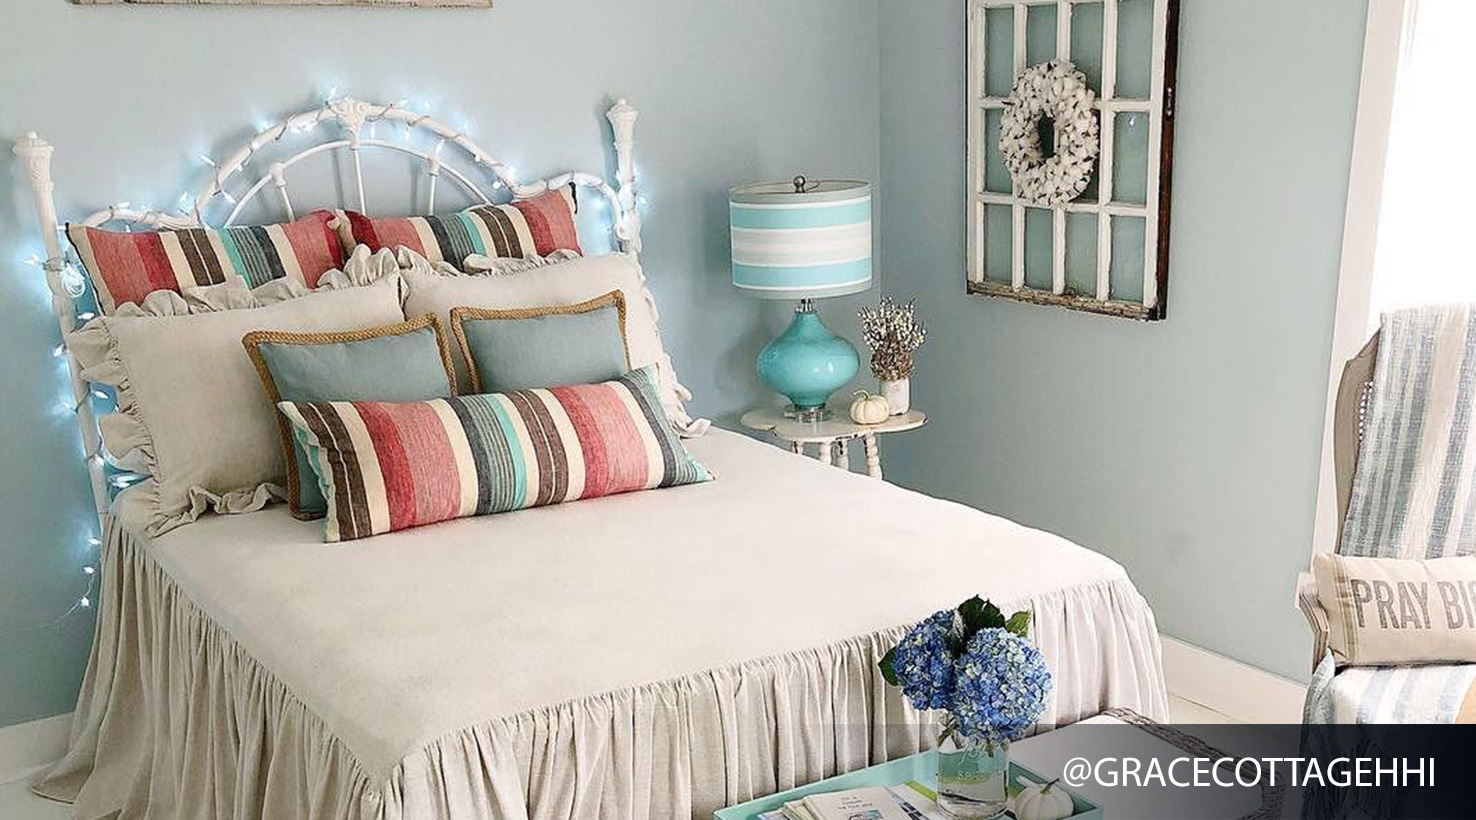 Bedroom Paint Color Ideas Inspiration Gallery Sherwin Williams pertaining to dimensions 1476 X 820